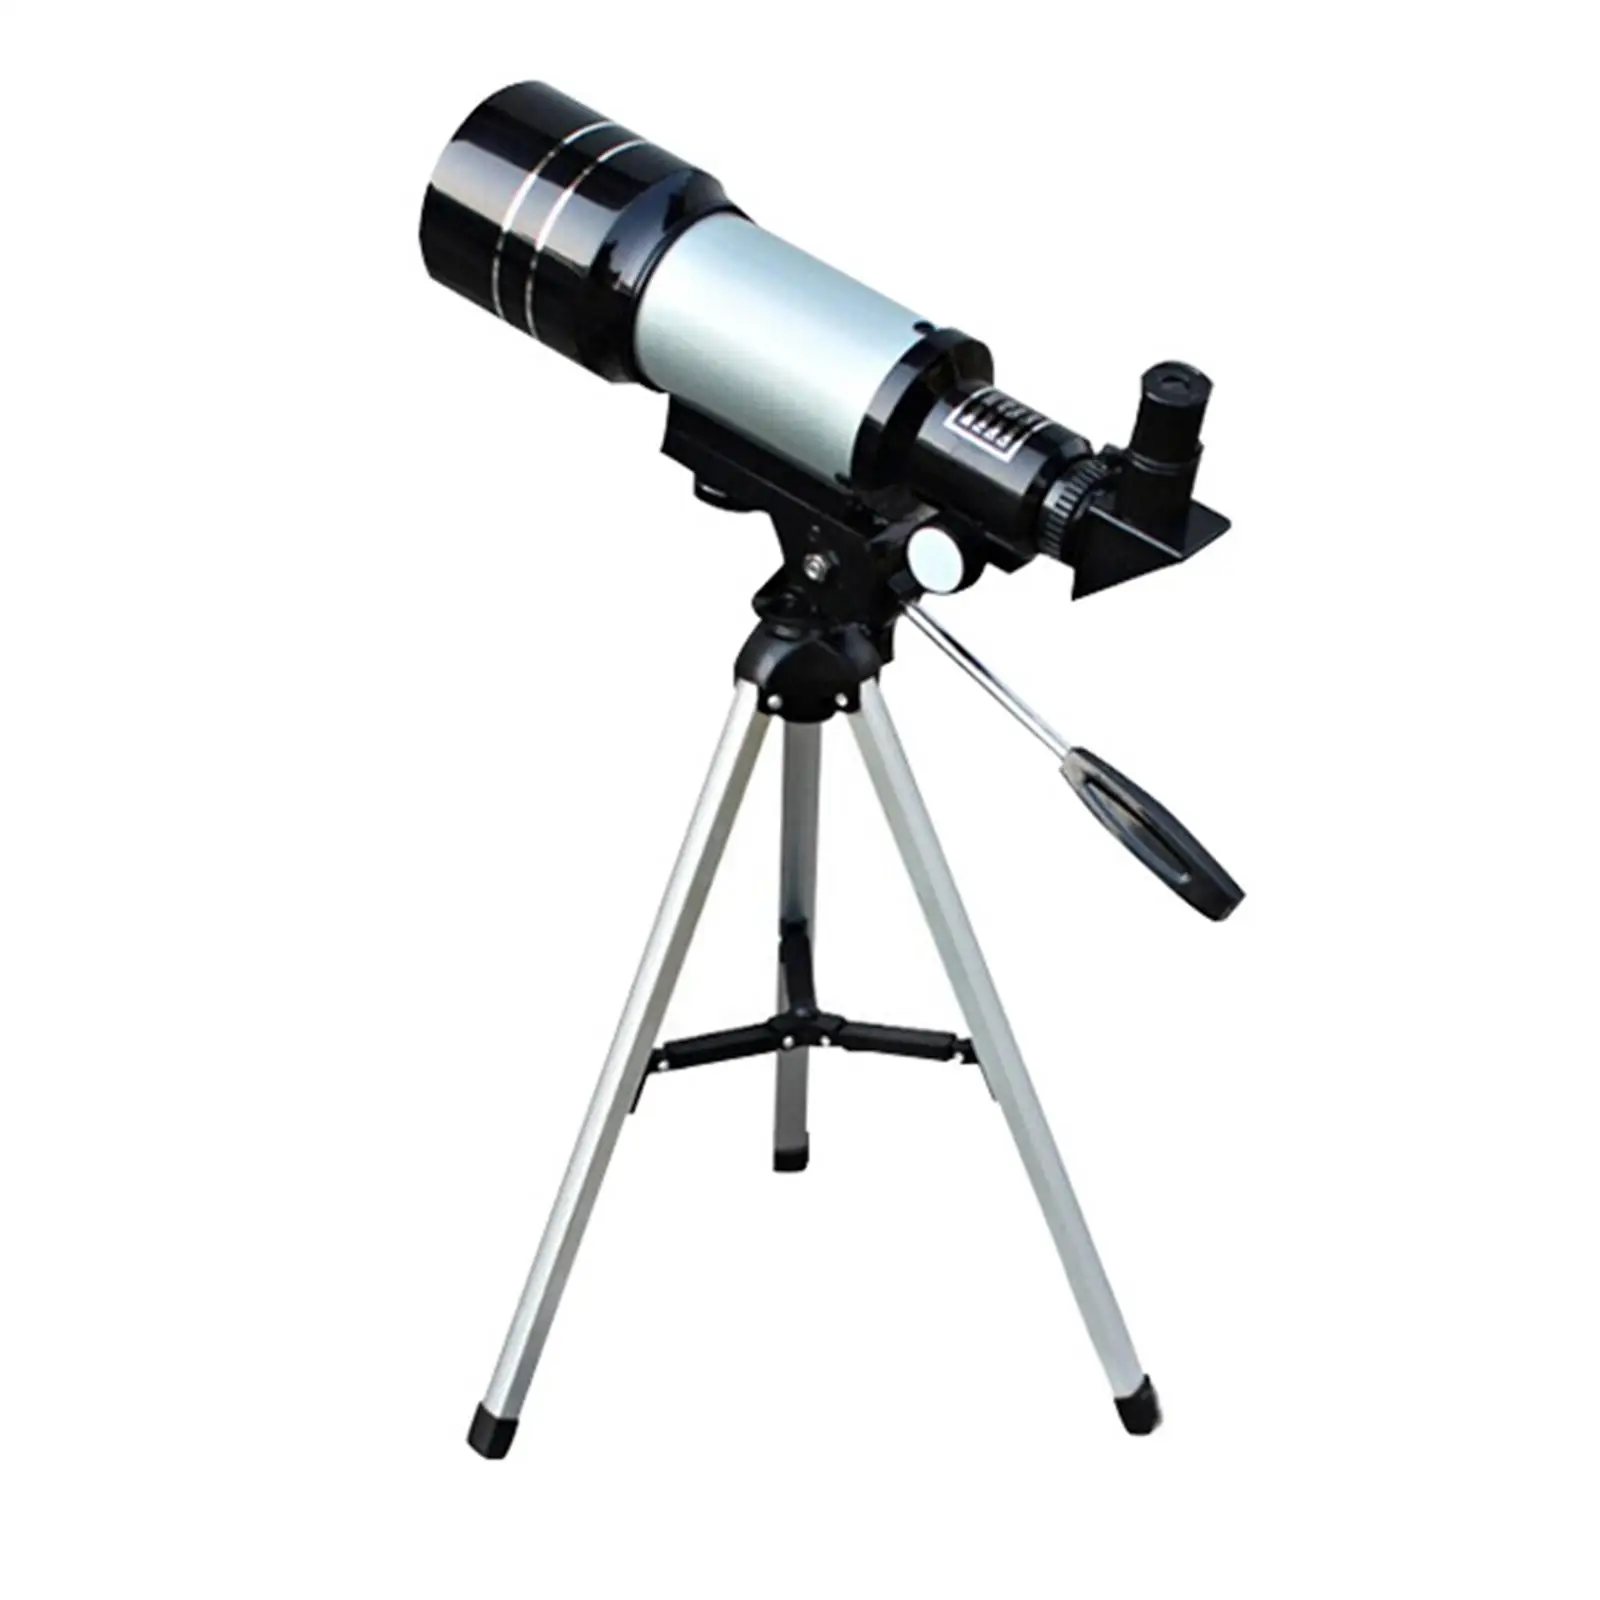 Portable 70mm 300mm Telescope with Tripod for Beginners Travel Telescope Erect Image Optics with H20mm, H6mm Eyepieces Accessory